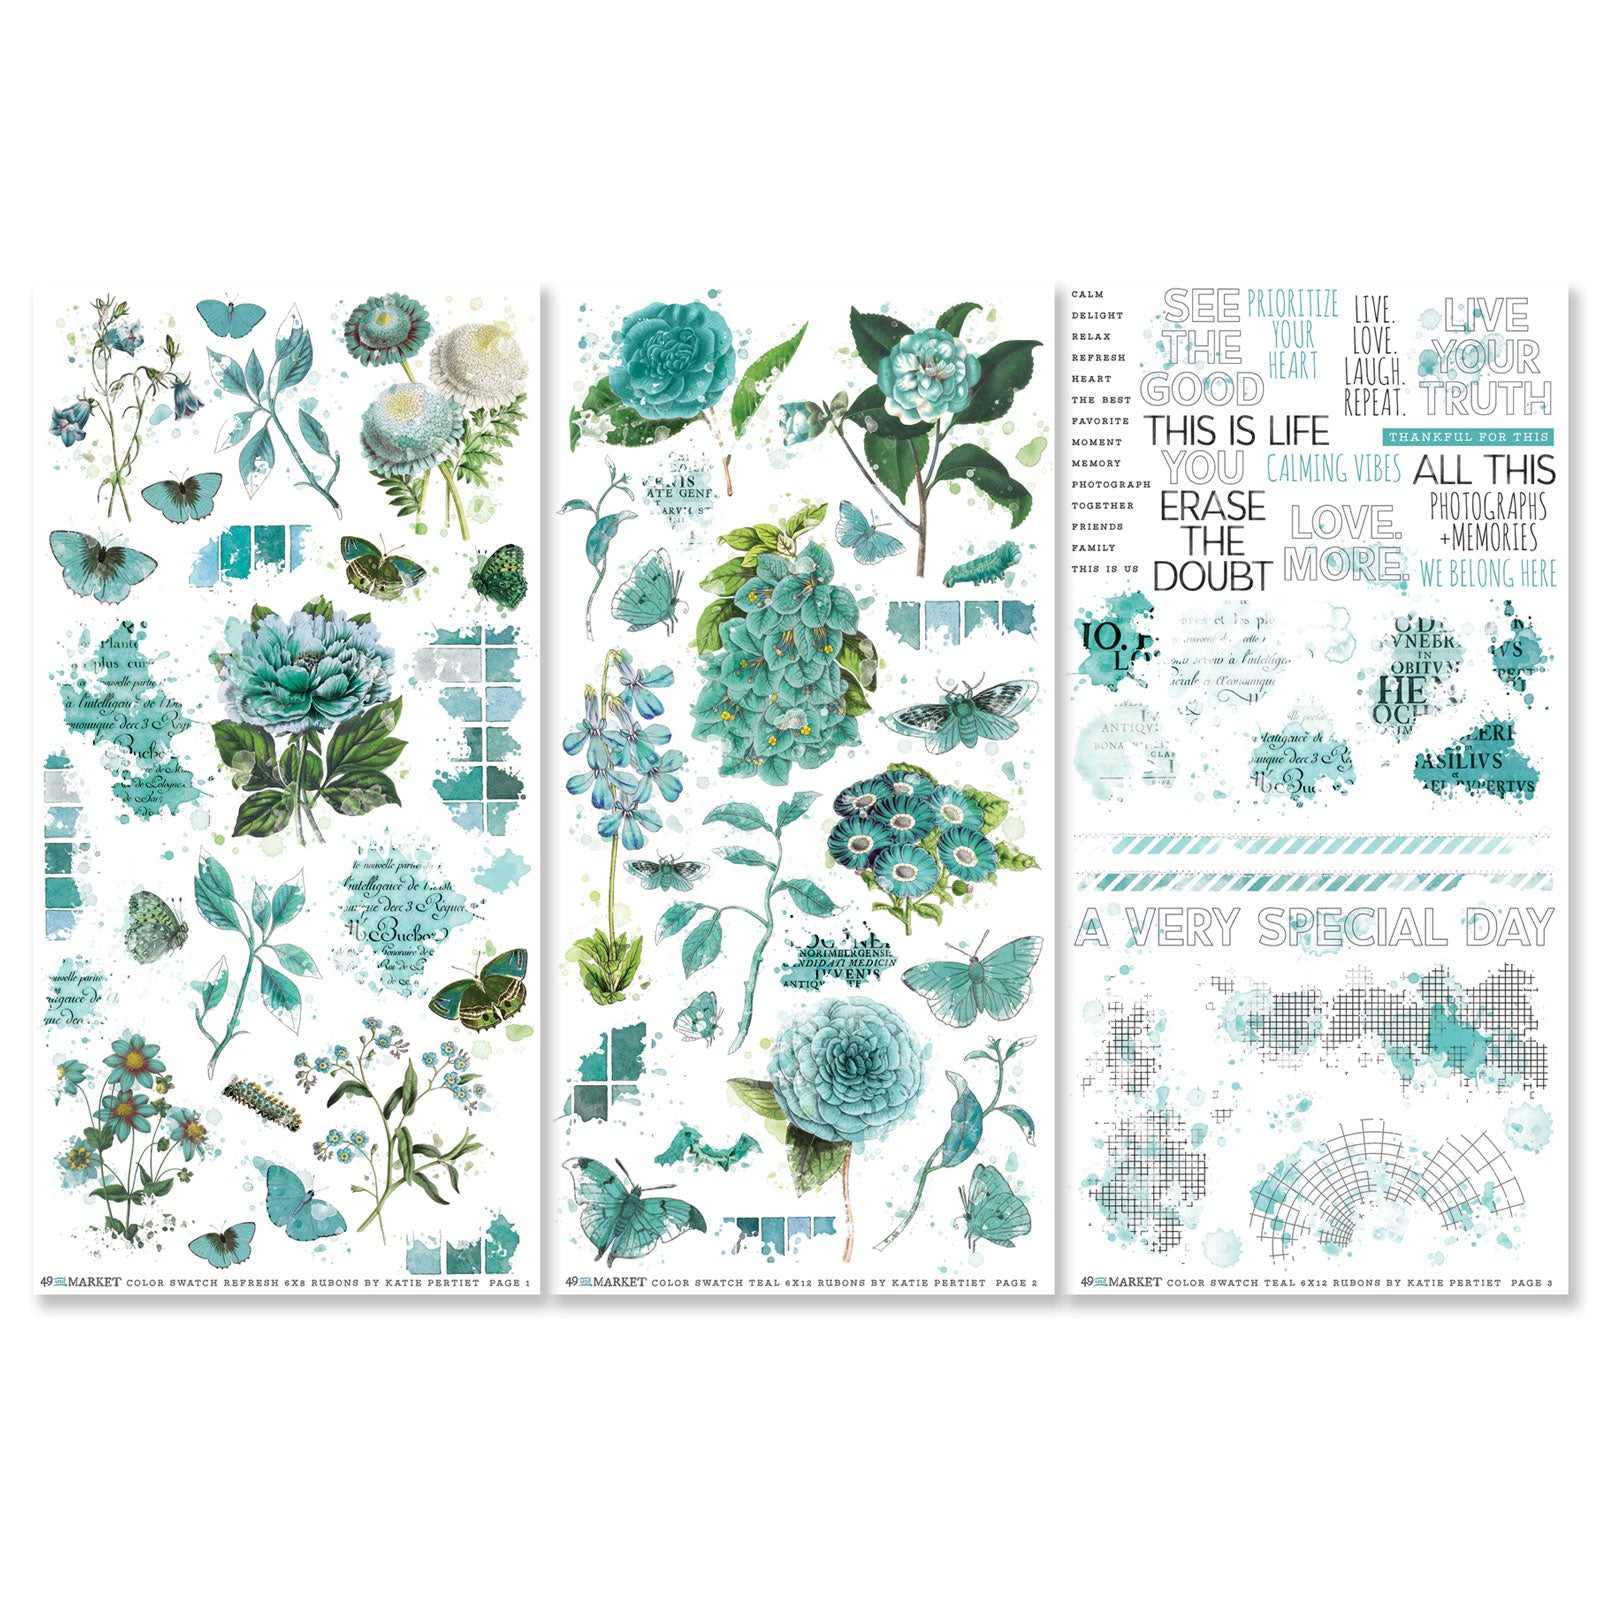 49 & Market Color Swatch Teal 6 x 12 Rub-On Transfer Set